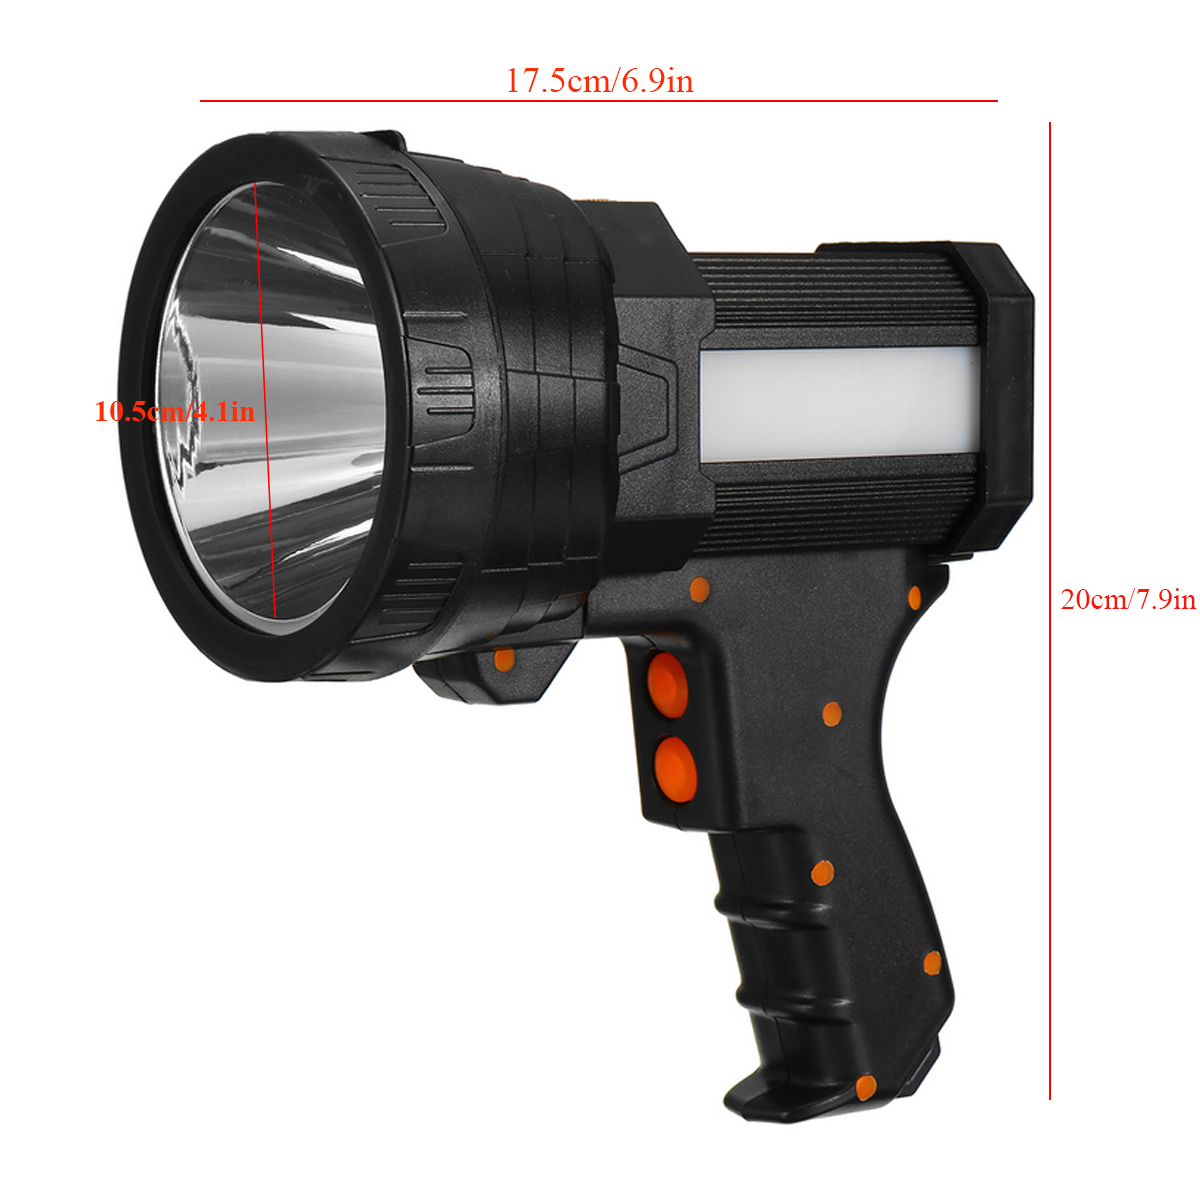 L2-Strong-LED-Spotlight-with-Tripod-USB-Rechargeable-Powerful-Searchlight-Portable-Handle-Flashlight-1756922-2